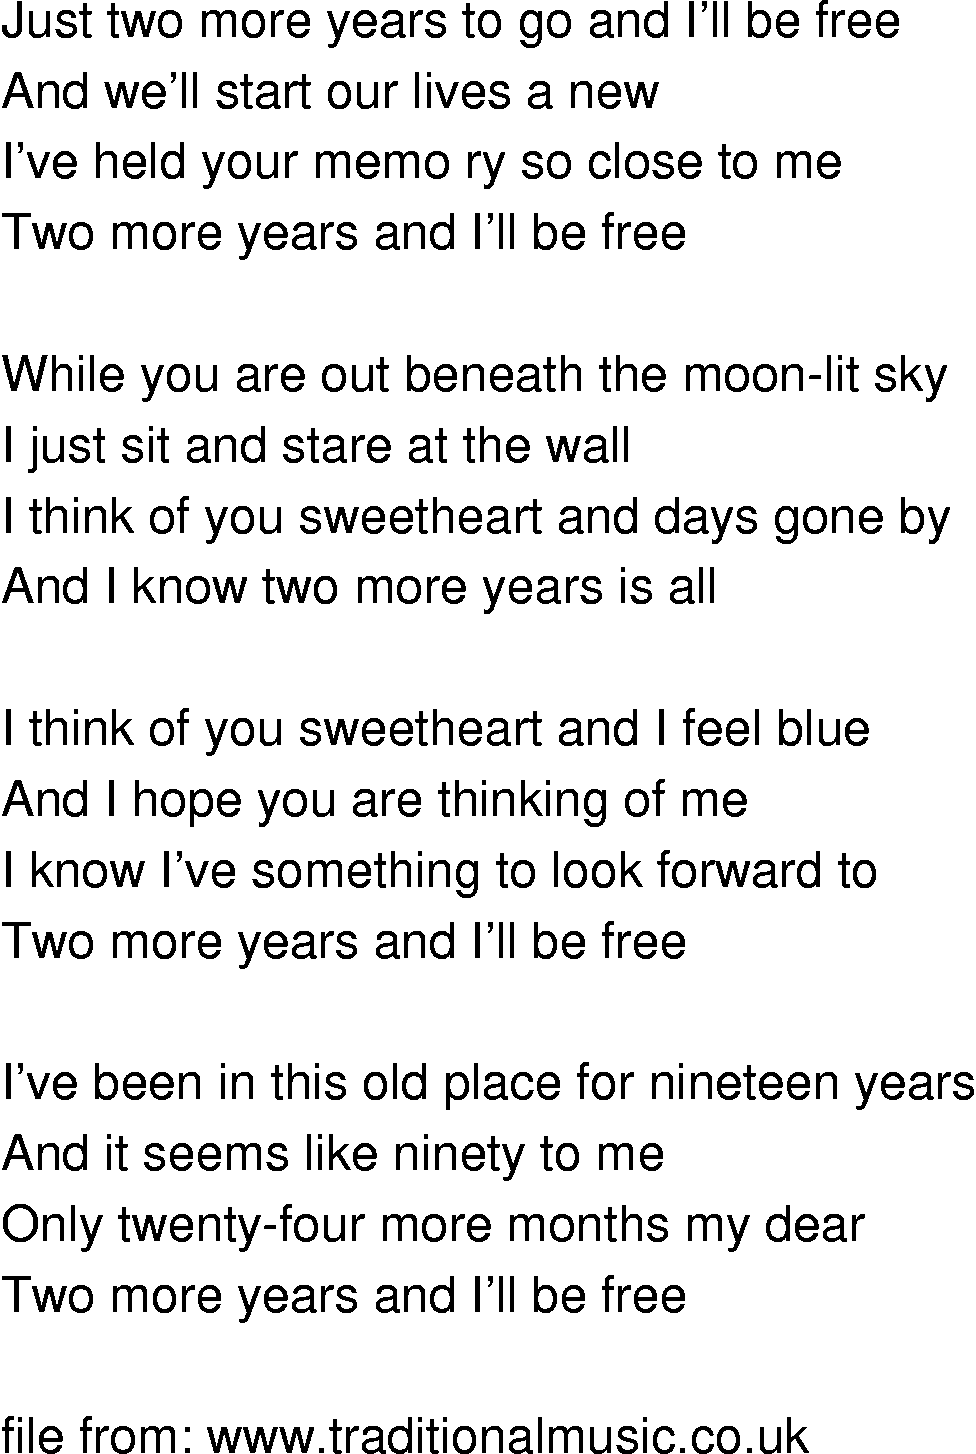 Old-Time (oldtimey) Song Lyrics - two more years